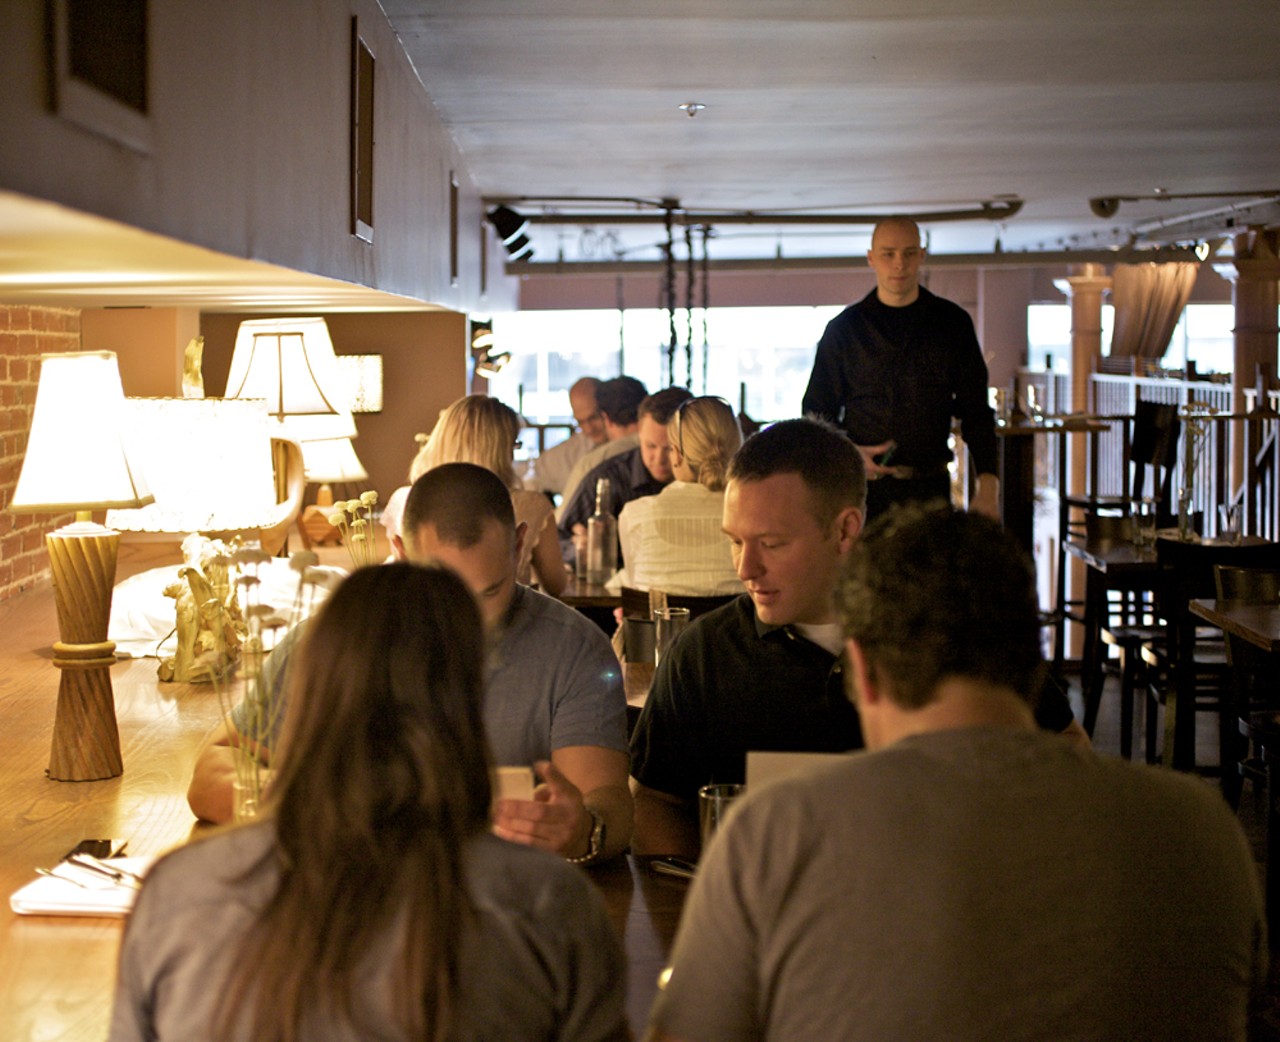 The upstairs dining room had a nice lunch crowd last Friday (April 30, 2010.)